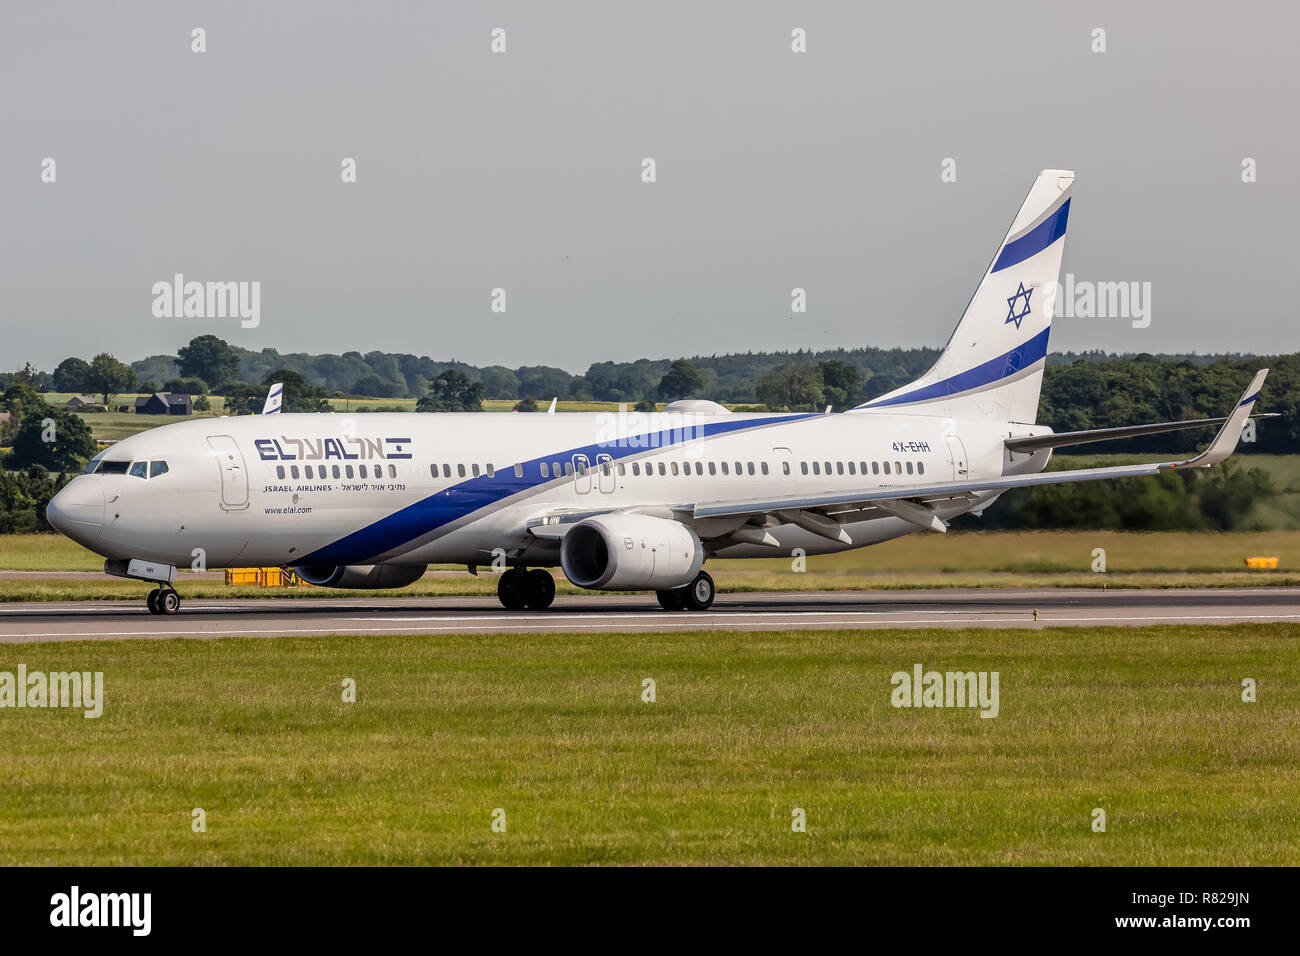 An El Al Israeli Boeing 737 aircraft, registration 4X-EHH, preparing for take off at London Luton Airport. Stock Photo